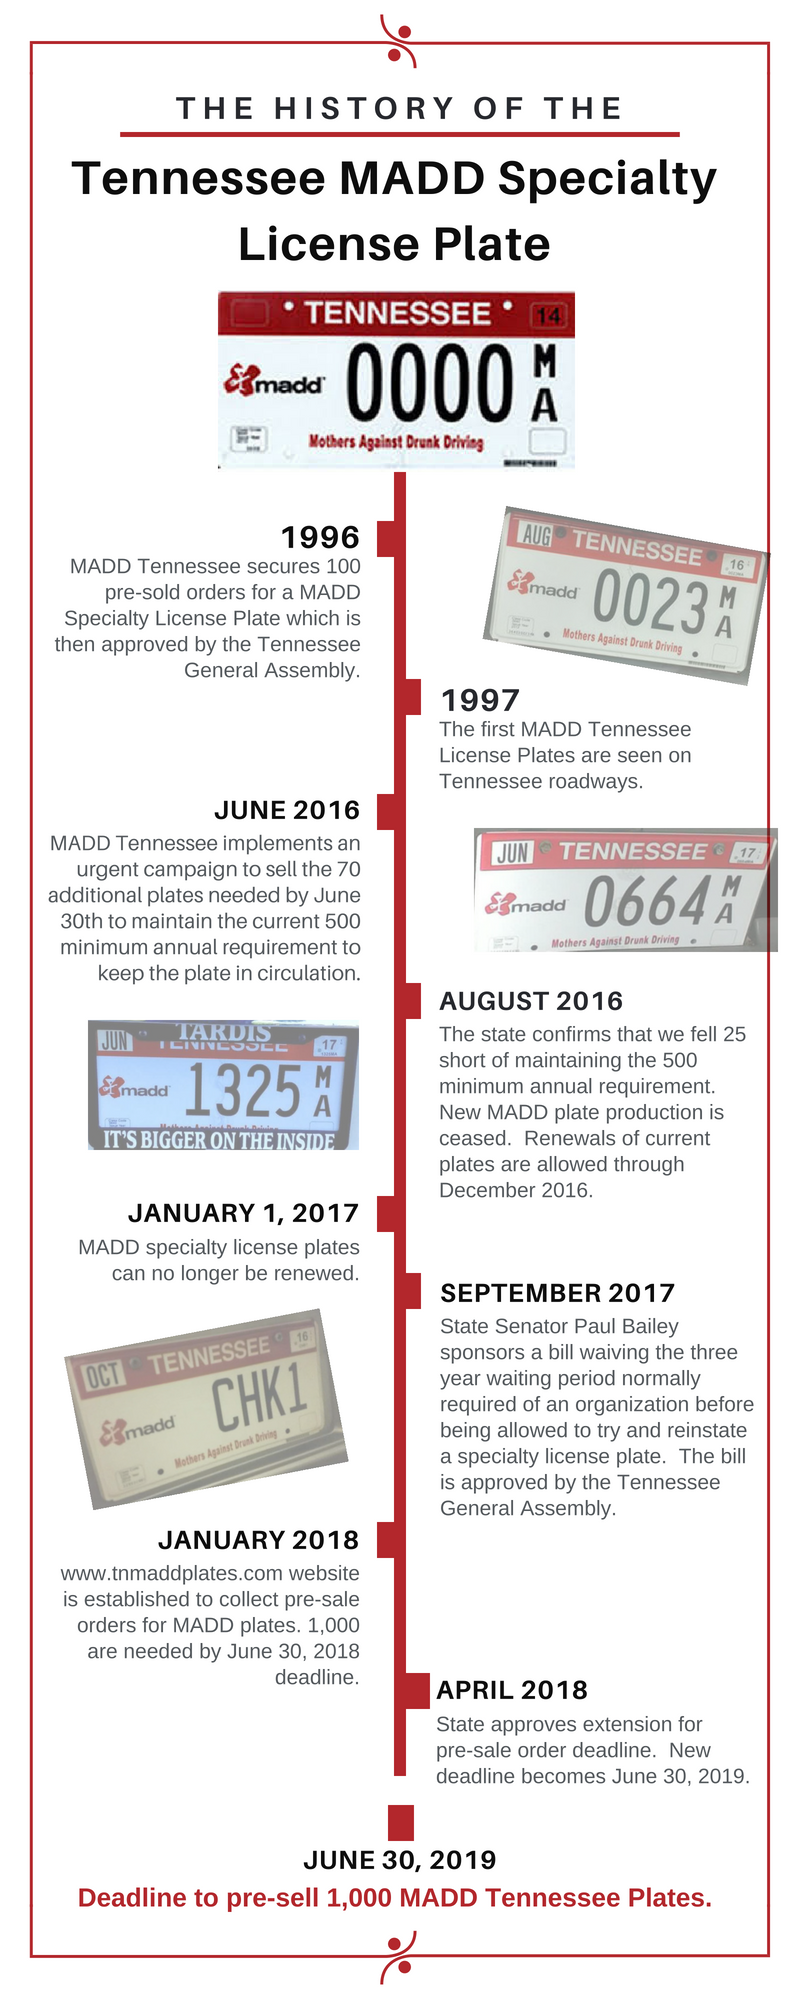 MADD Specialty License Plate History Timeline Infographic